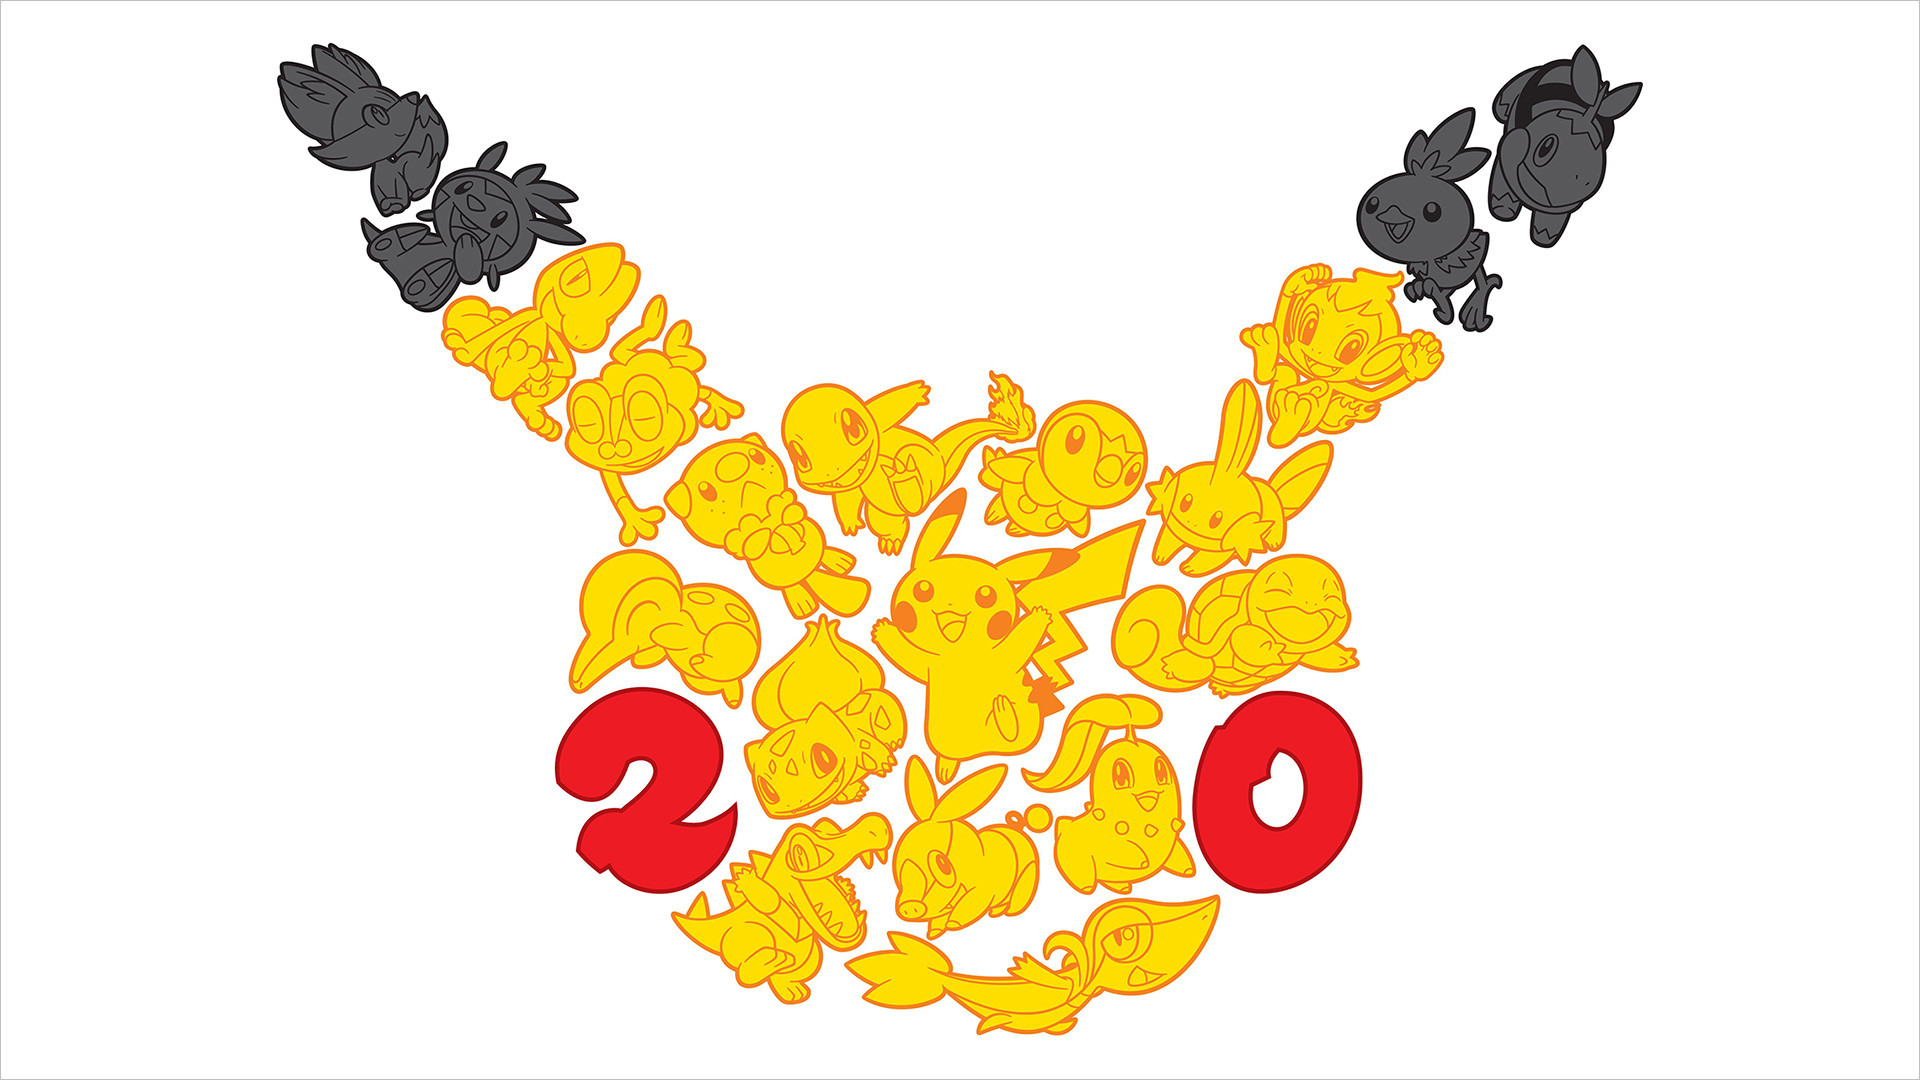 1920x1080 PokÃ©mon Will Celebrate Its 20th Anniversary With an Ad on Super Bowl 50